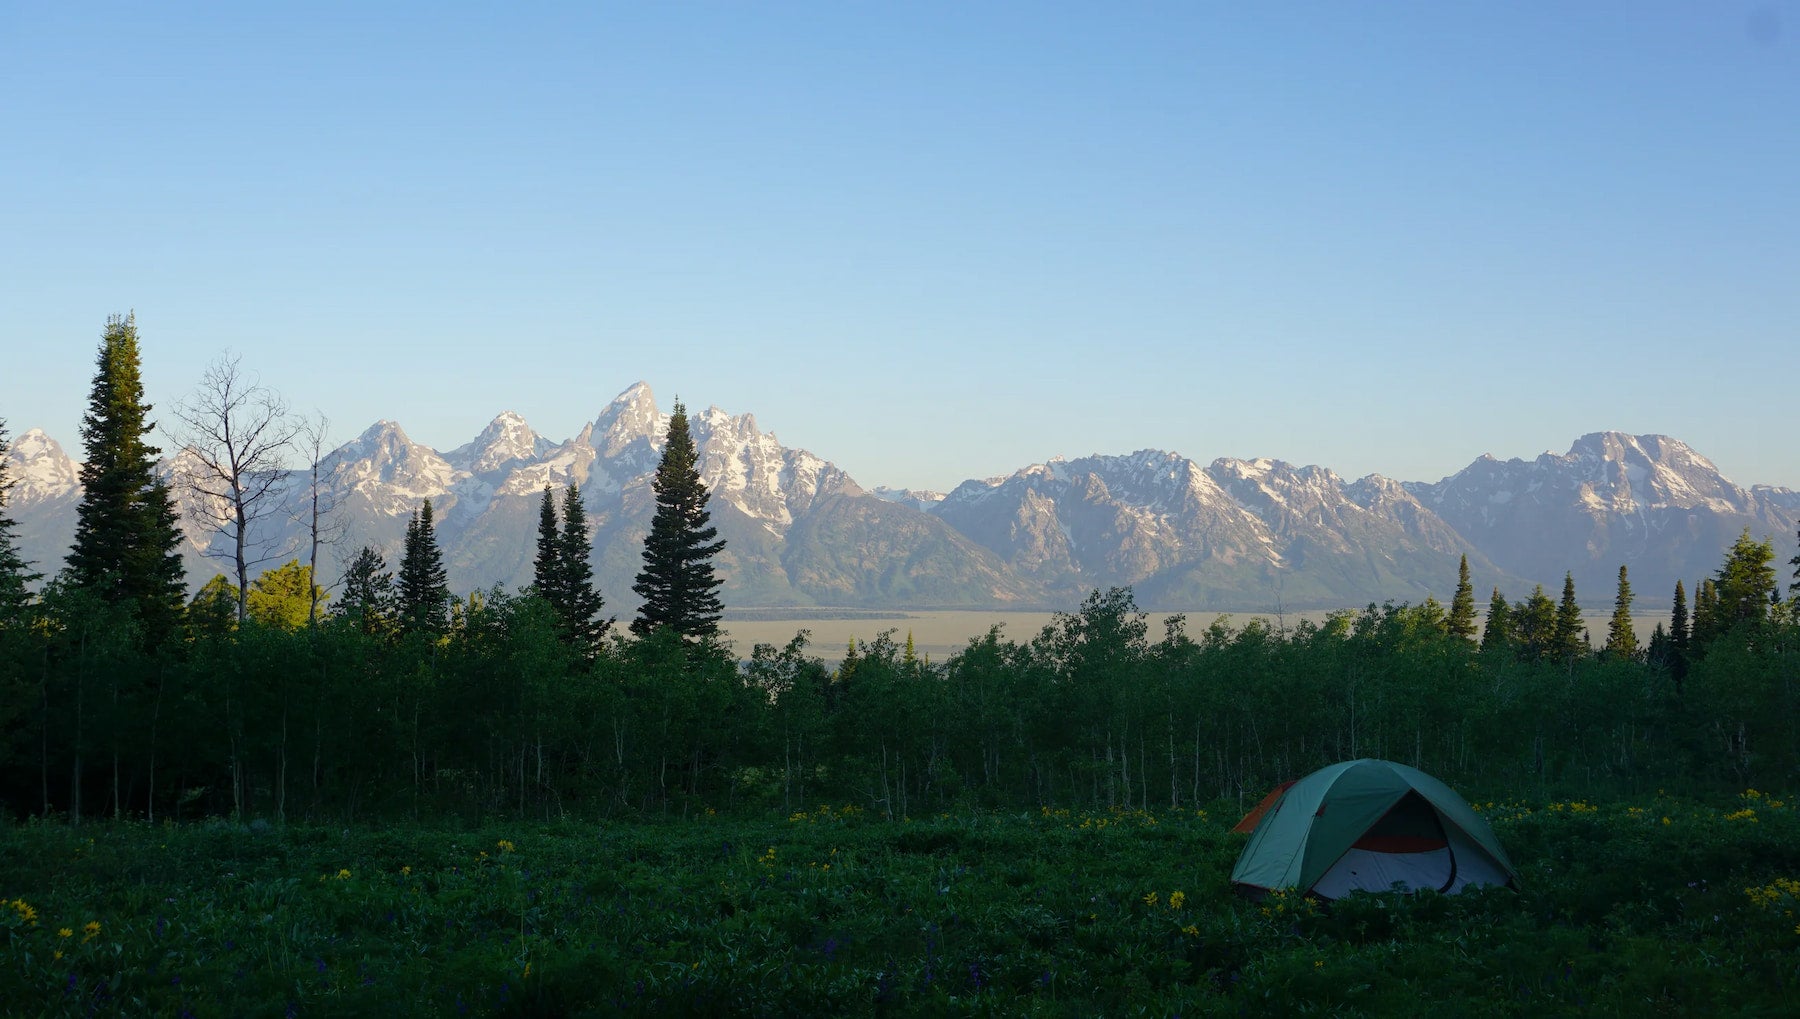 Tent pitched on field below a panoramic mountain landscape.